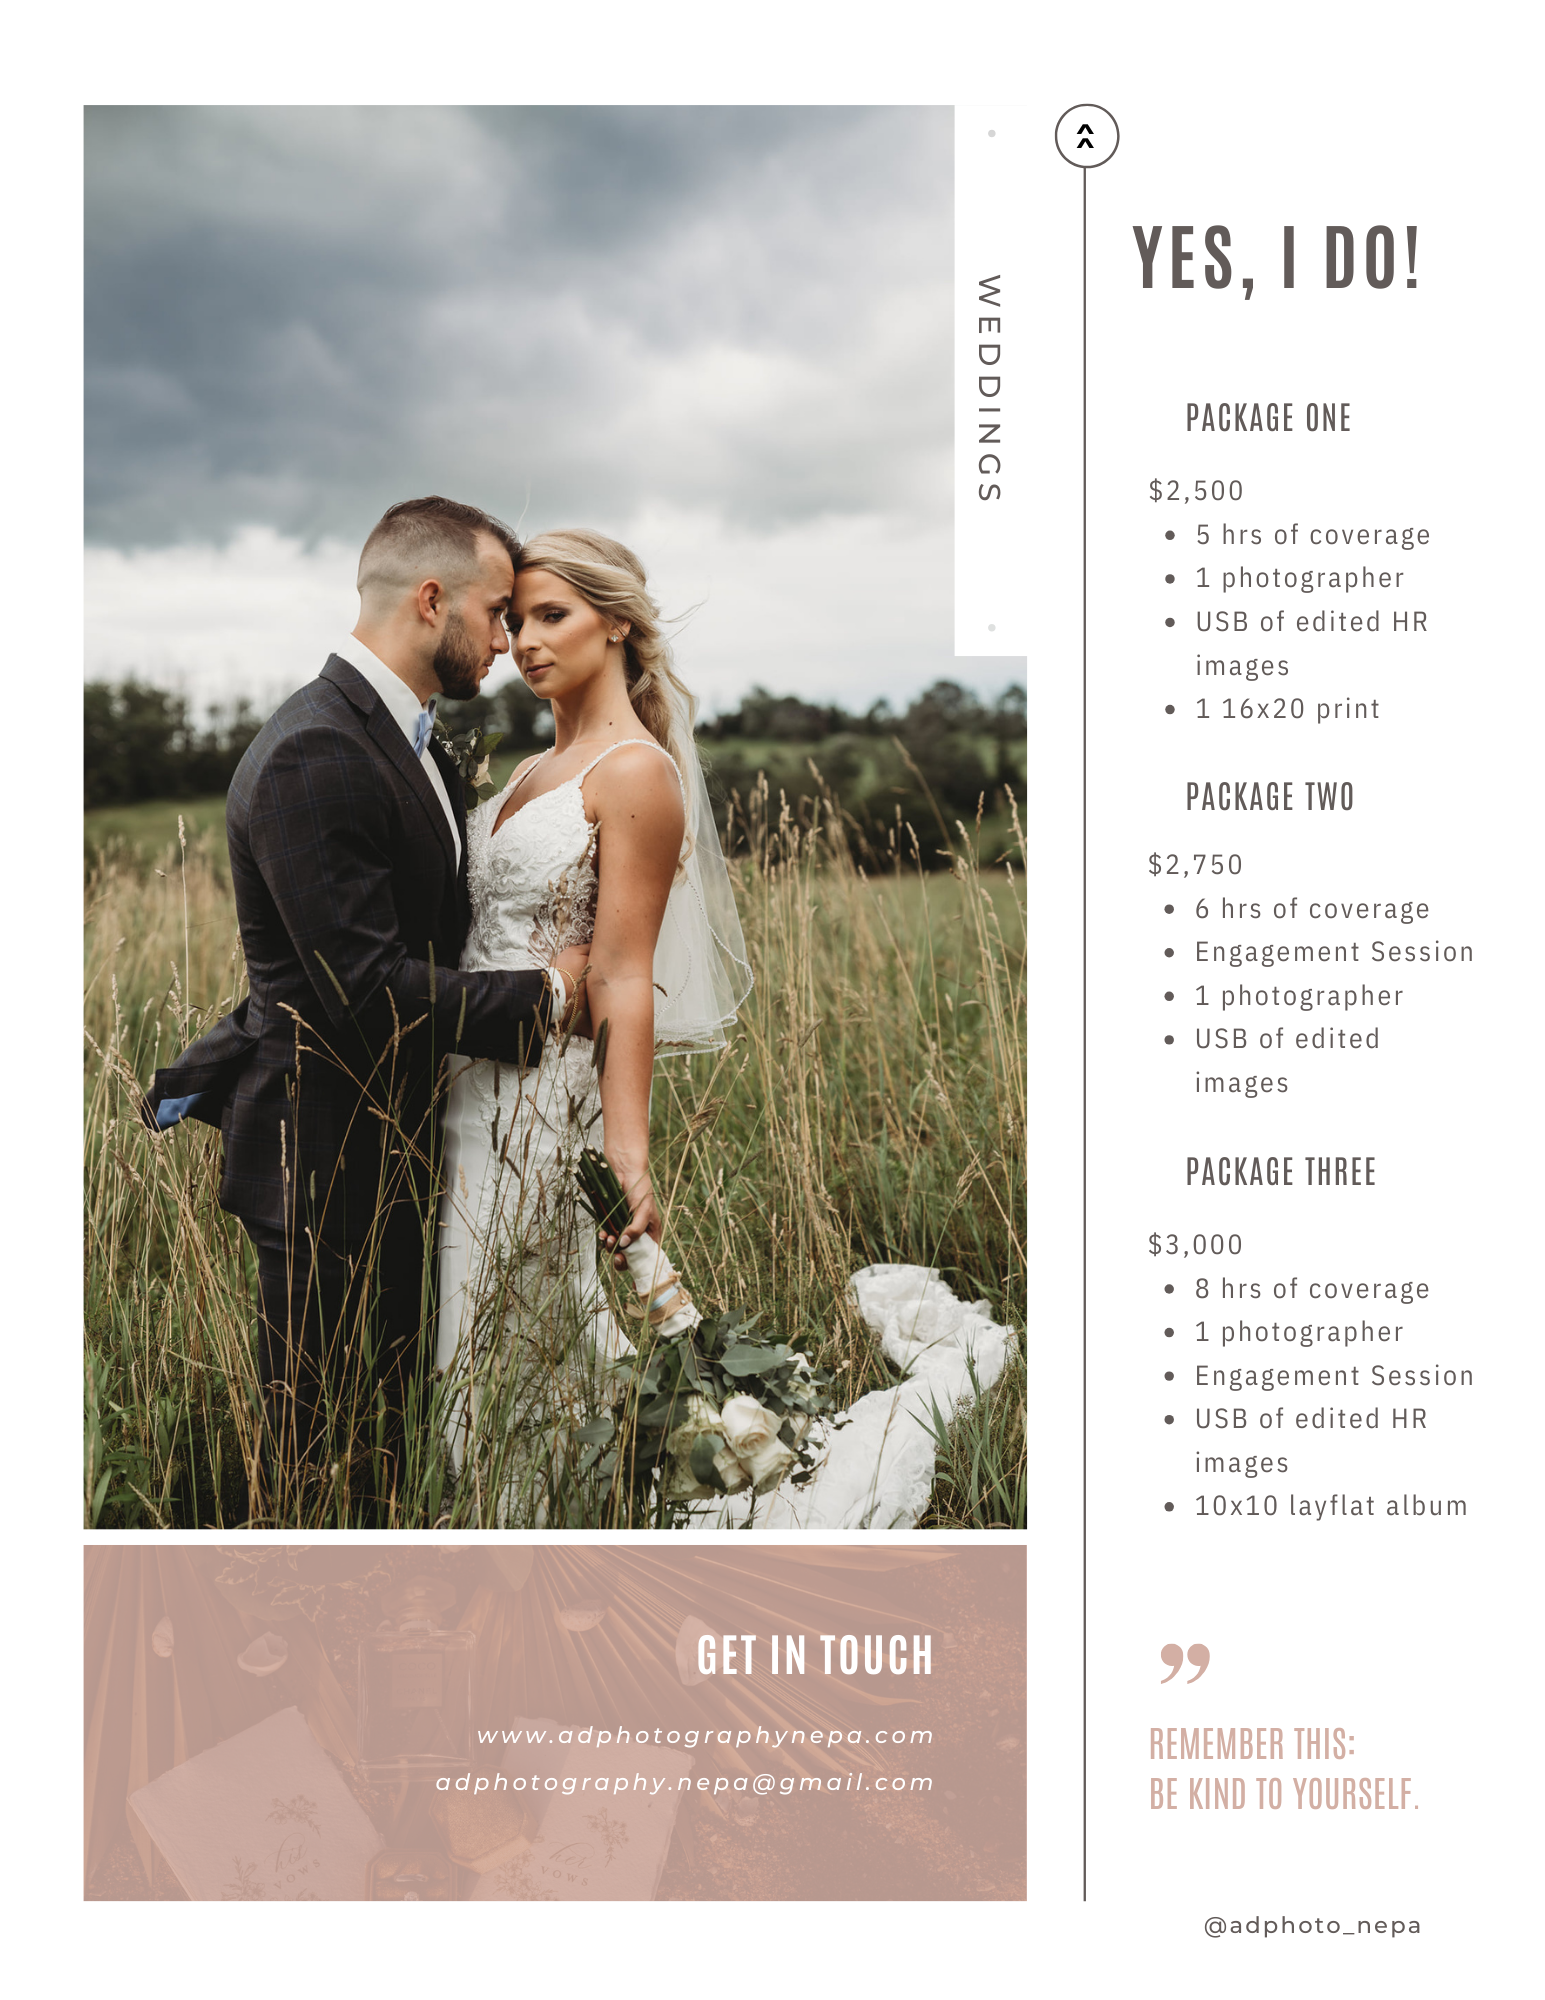 Wedding Photographer Pricing Guide US Letter Document.png